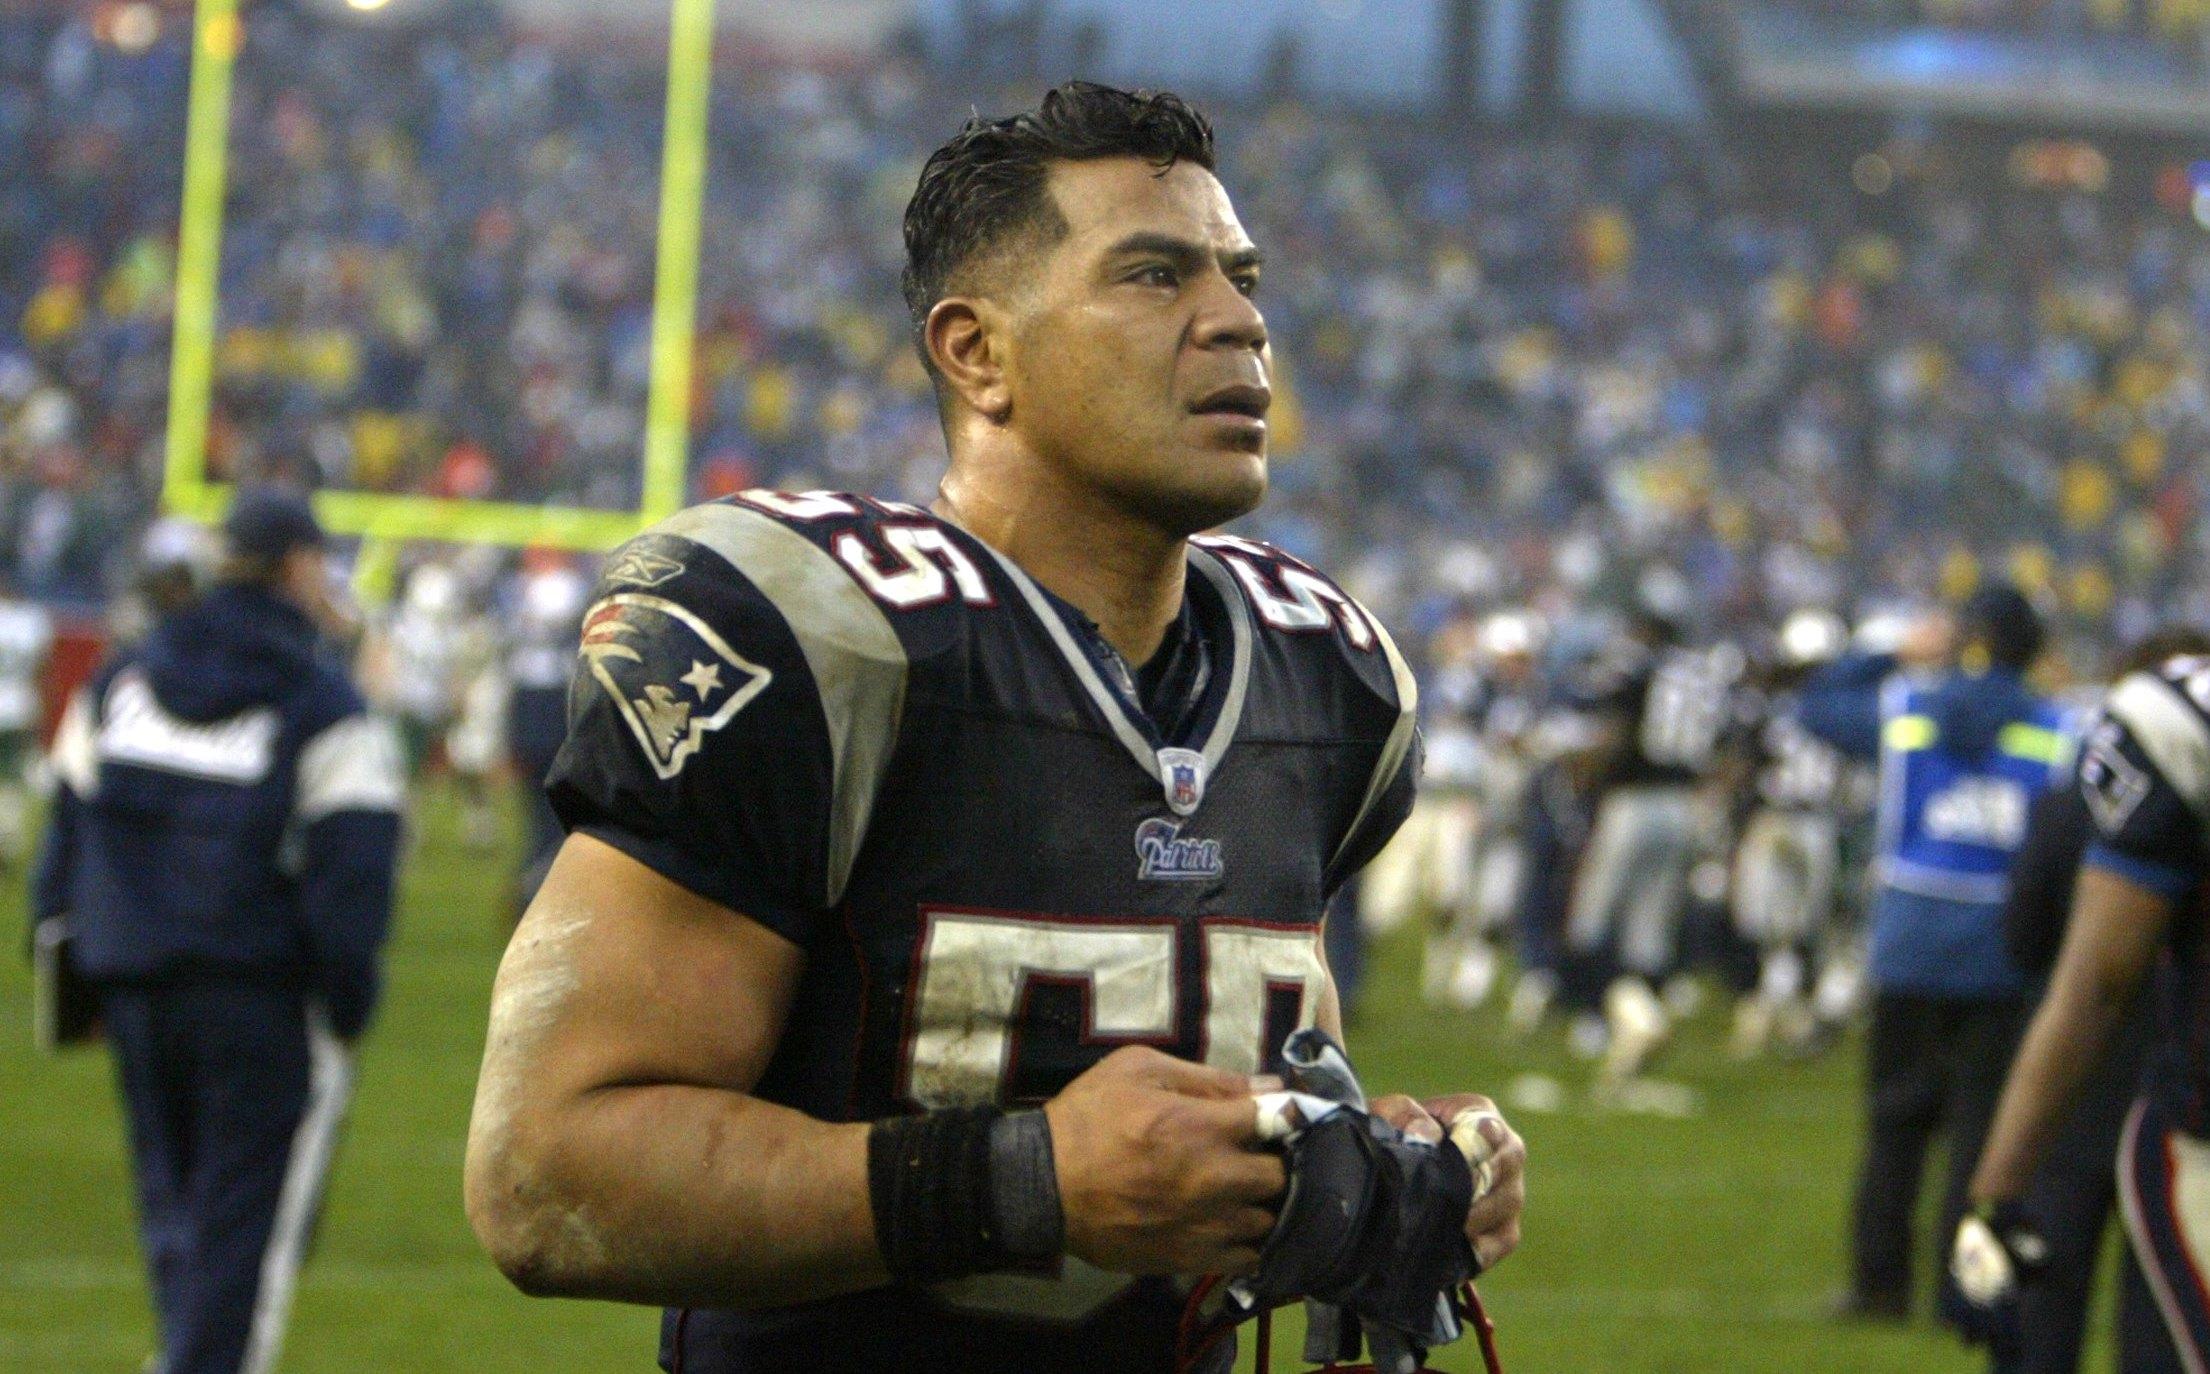 Junior Seaus Family Settles Wrongful Death Lawsuit With Nfl